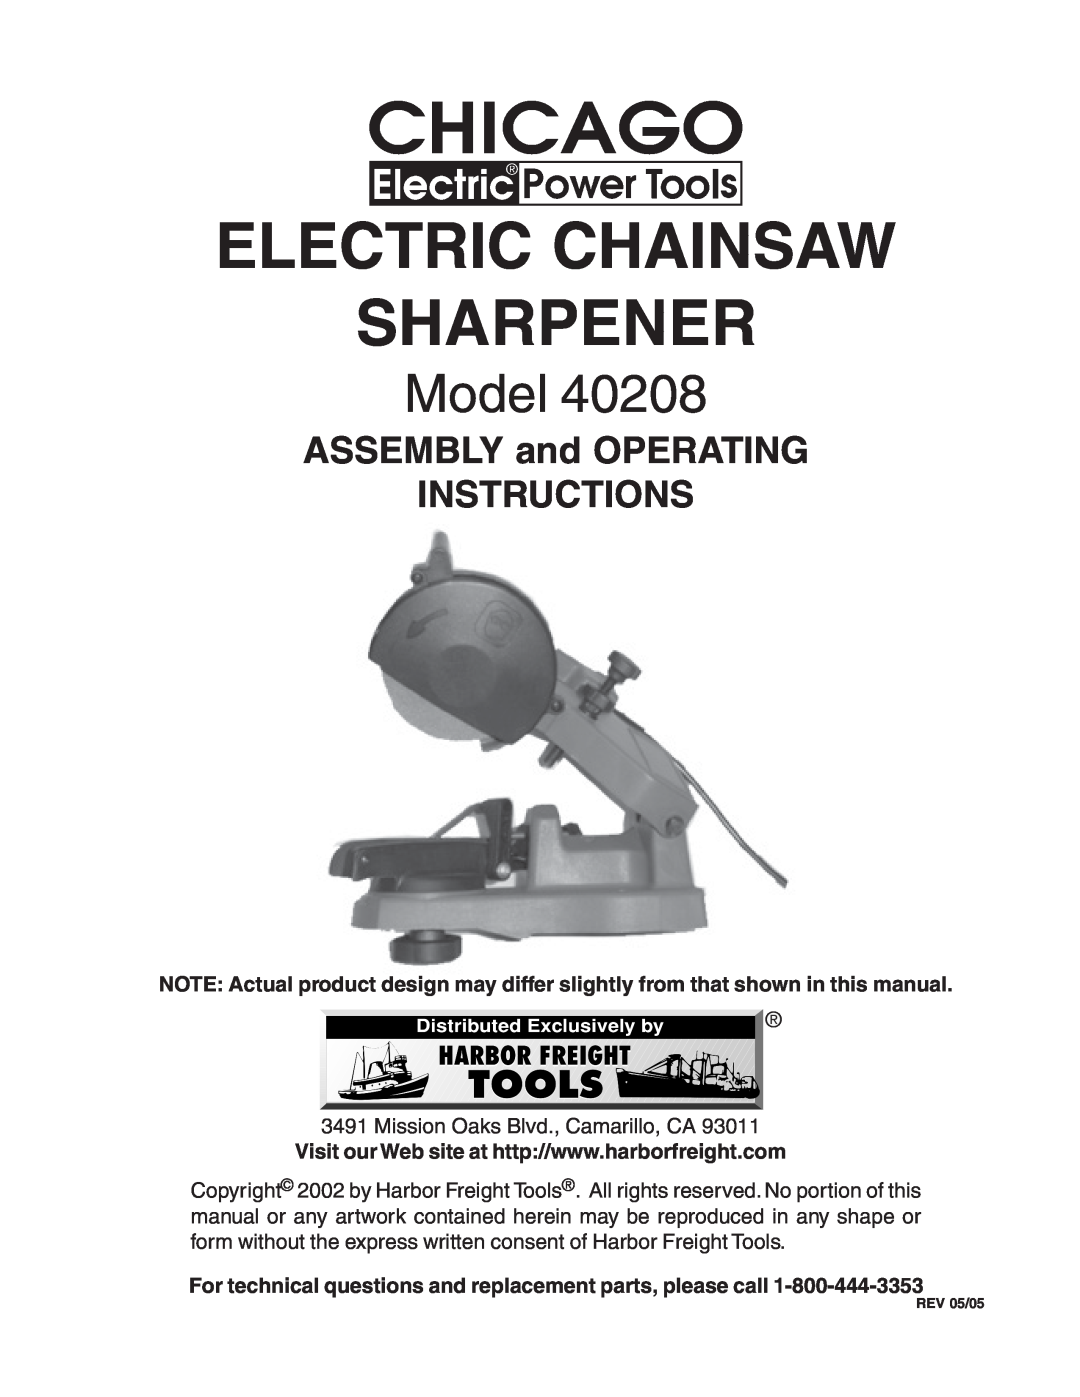 Harbor Freight Tools 40208 manual Electric Chainsaw Sharpener, Model, ASSEMBLY and OPERATING INSTRUCTIONS 